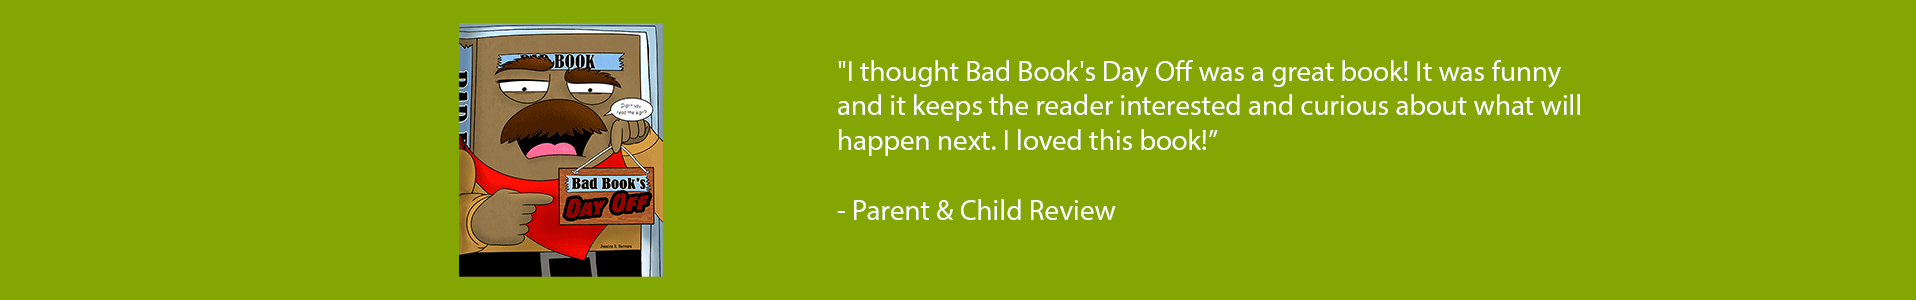 Bad Book's Day Off Parent Review Banner